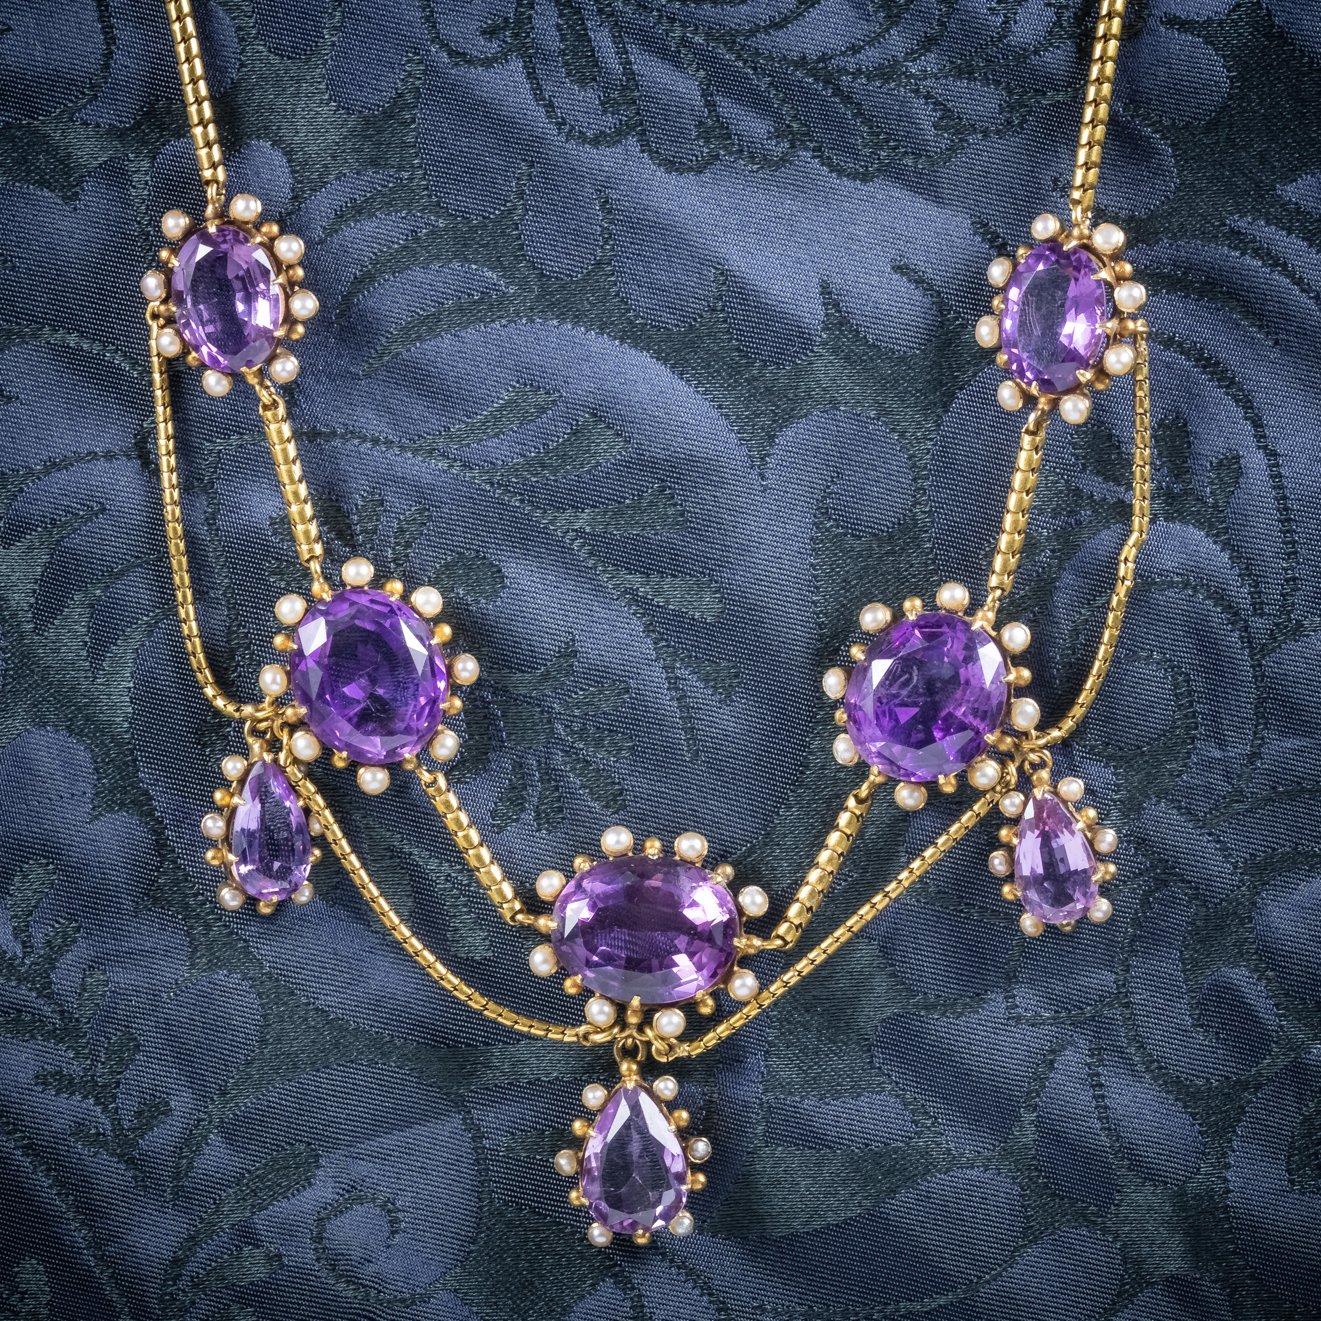 A stunning antique Victorian garland necklace (C.1860), adorned with approx. 60ct of beautiful, deep purple Amethyst, encircled by natural Pearls.

Five lovely, oval Amethyst dangle from a festoon chain leading to three teardrop Amethyst droppers.